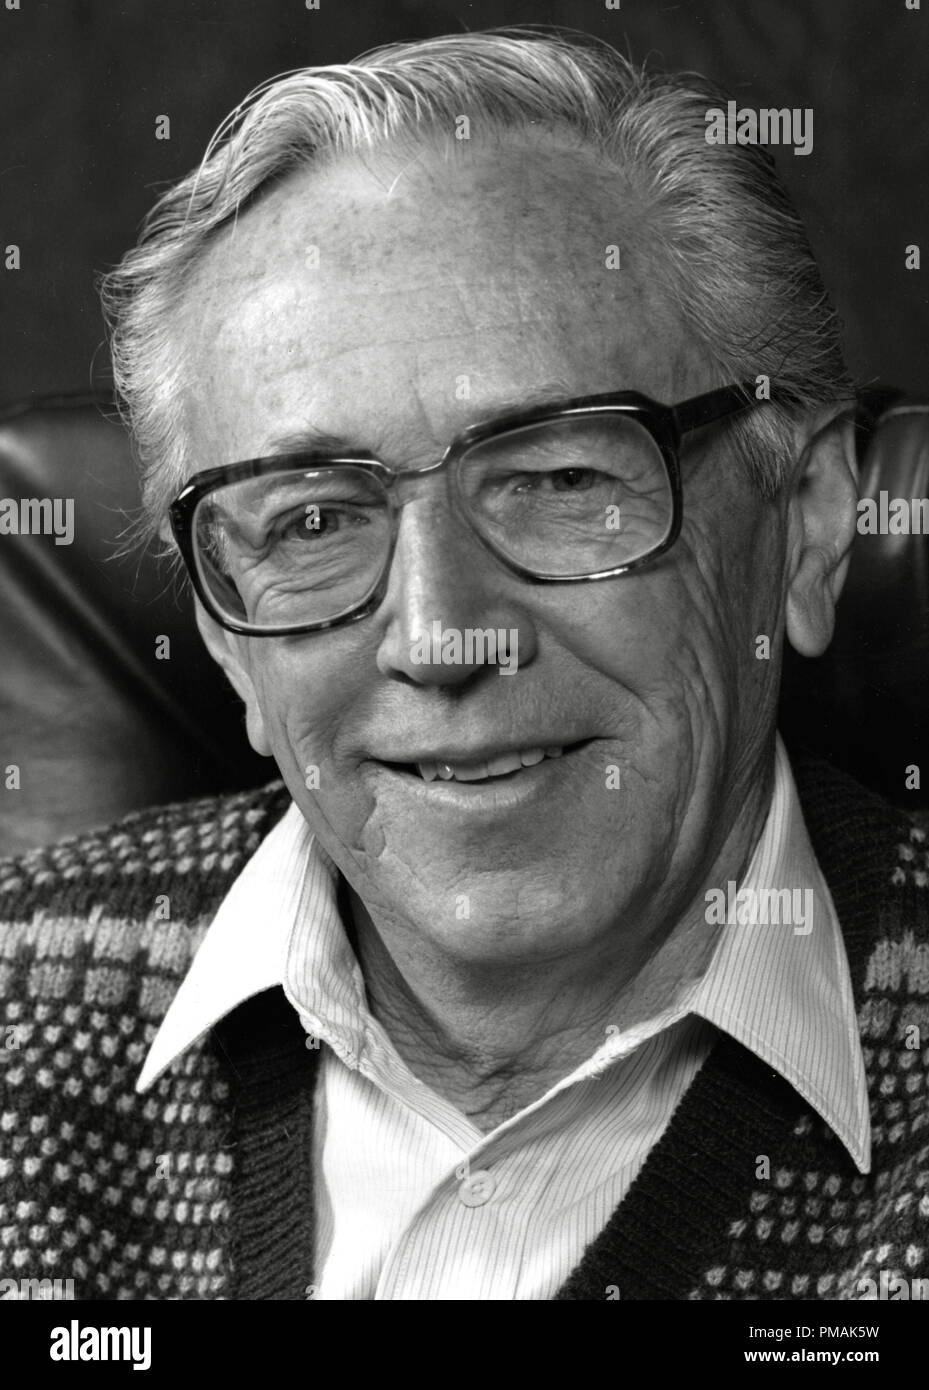 Charles M. Schulz, Creator of 'Peanuts' comic strip and characters, circa 1984  File Reference # 33300 245THA Stock Photo